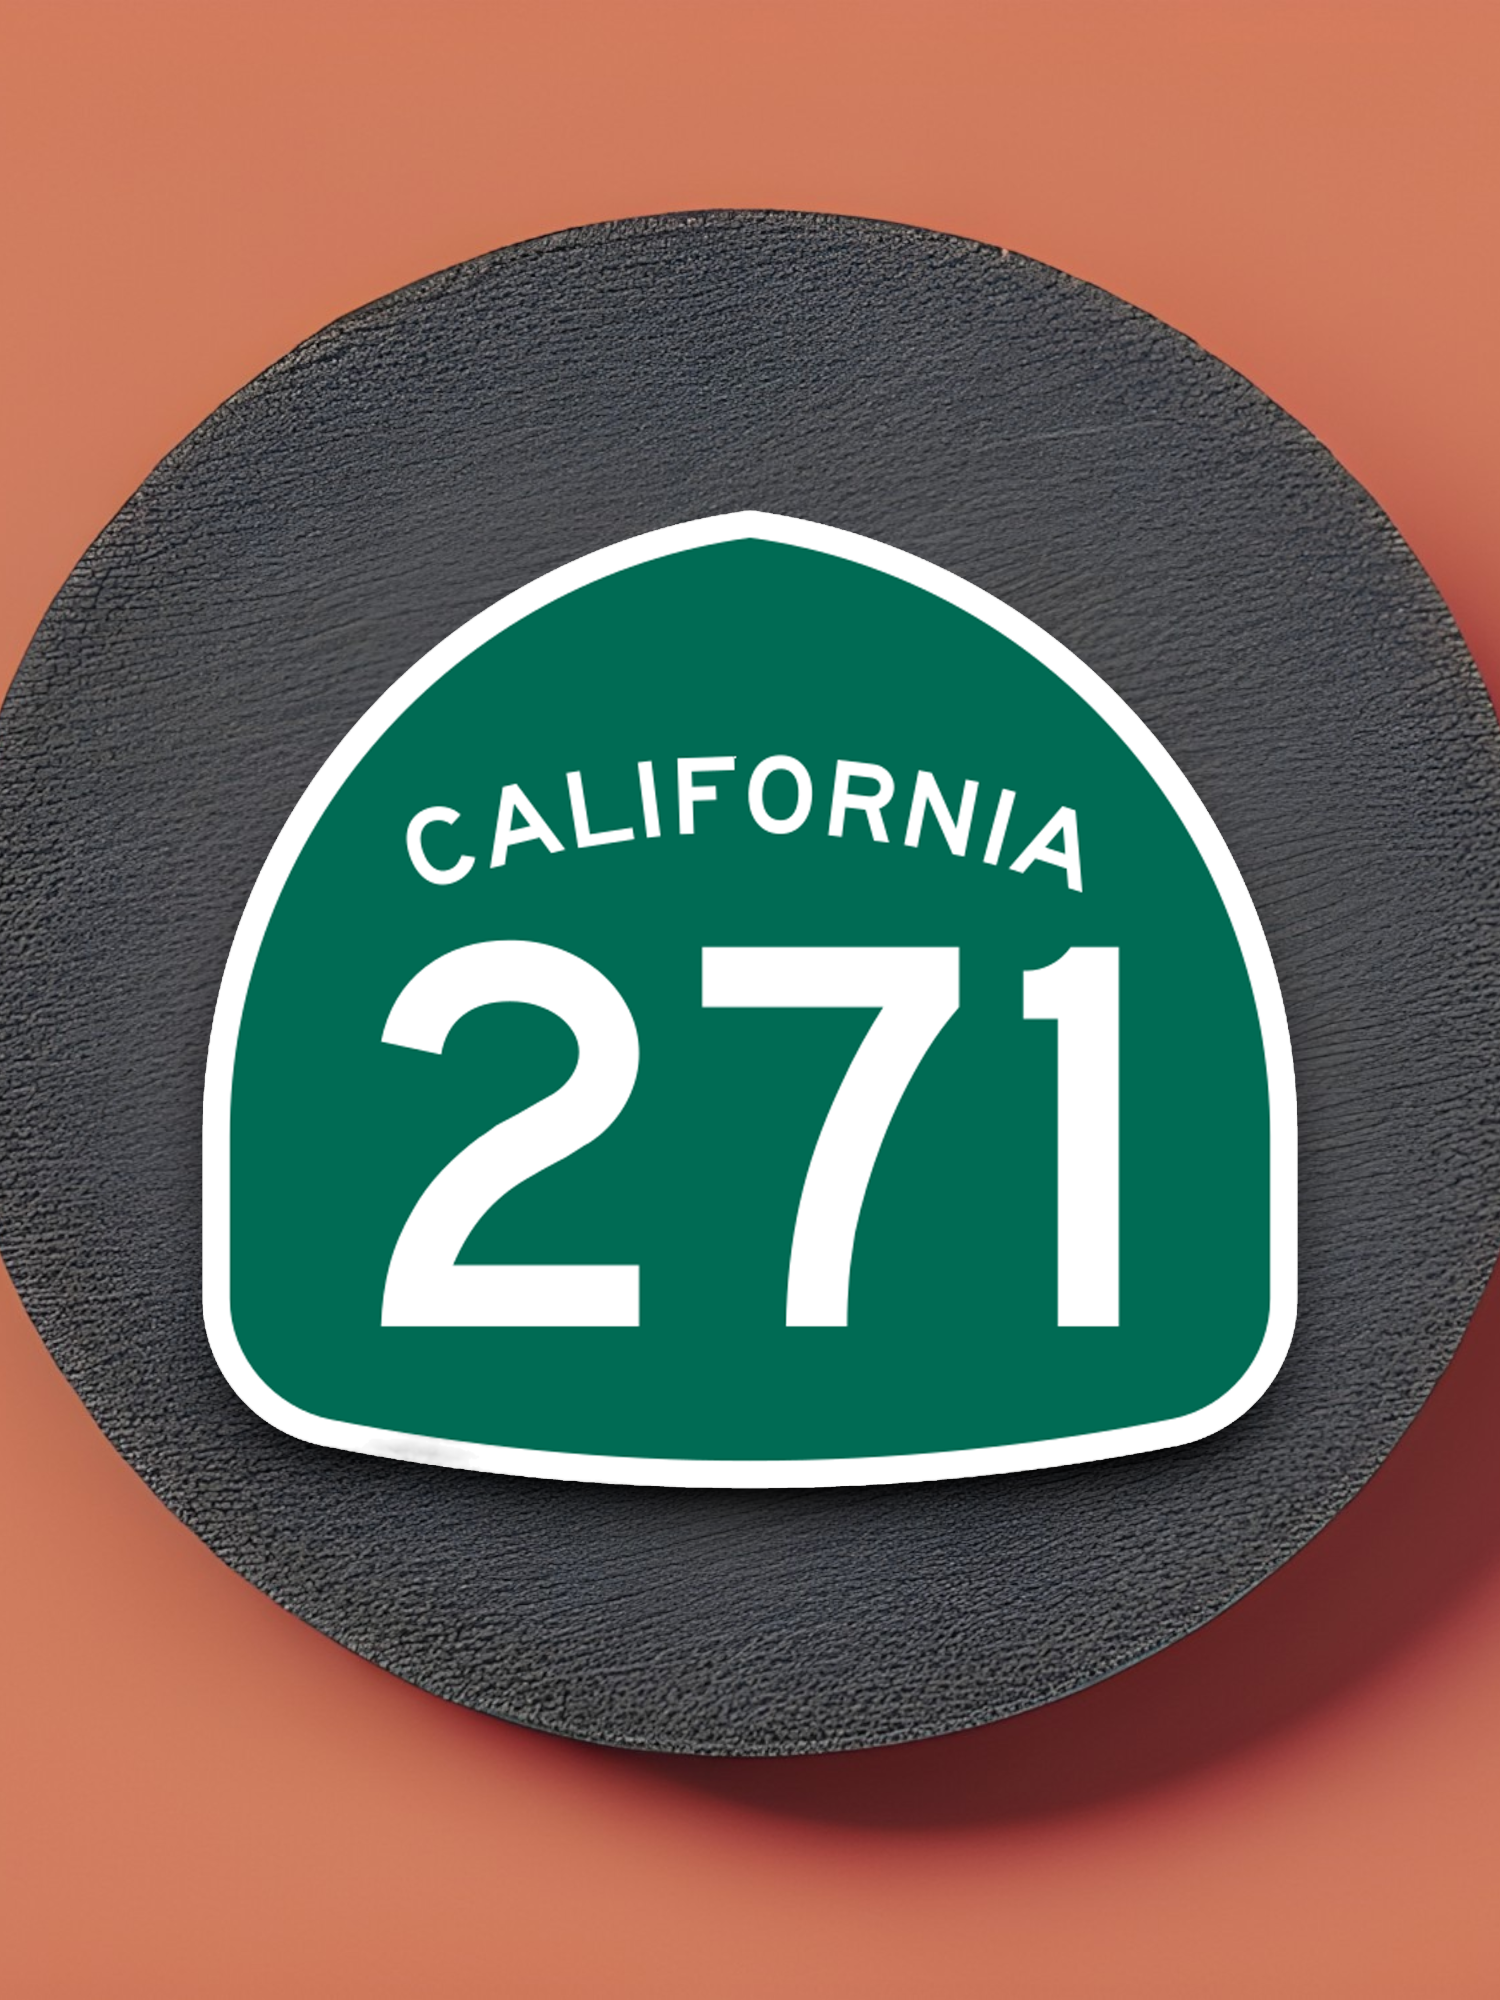 California State Route 271 Road Sign Sticker